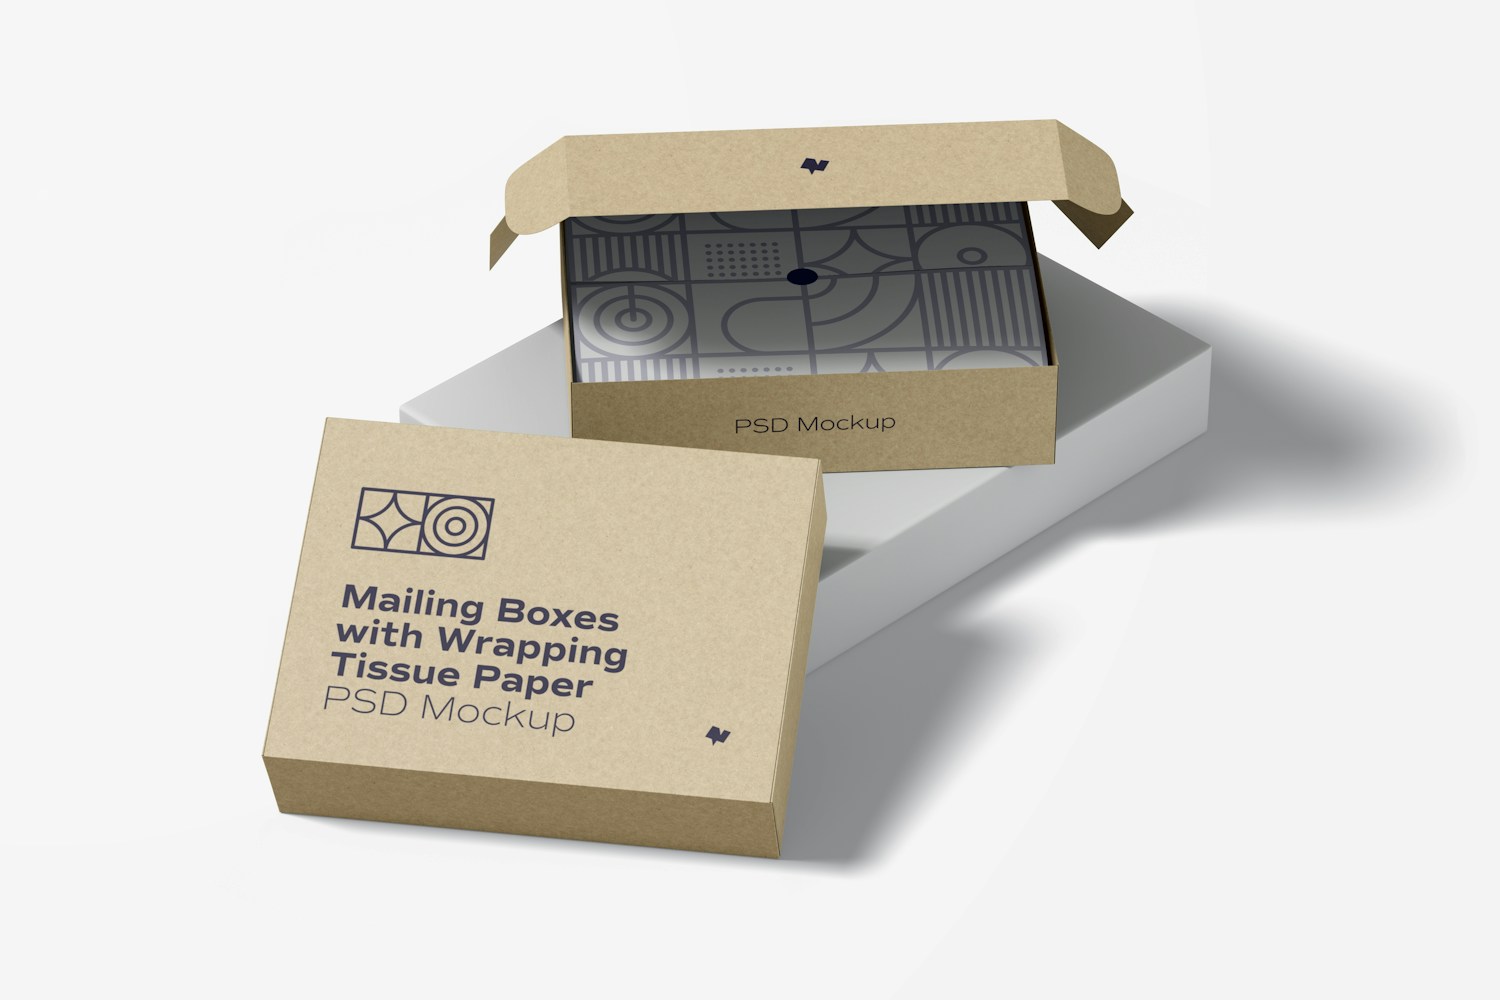 Mailing Boxes with Wrapping Tissue Paper Mockup